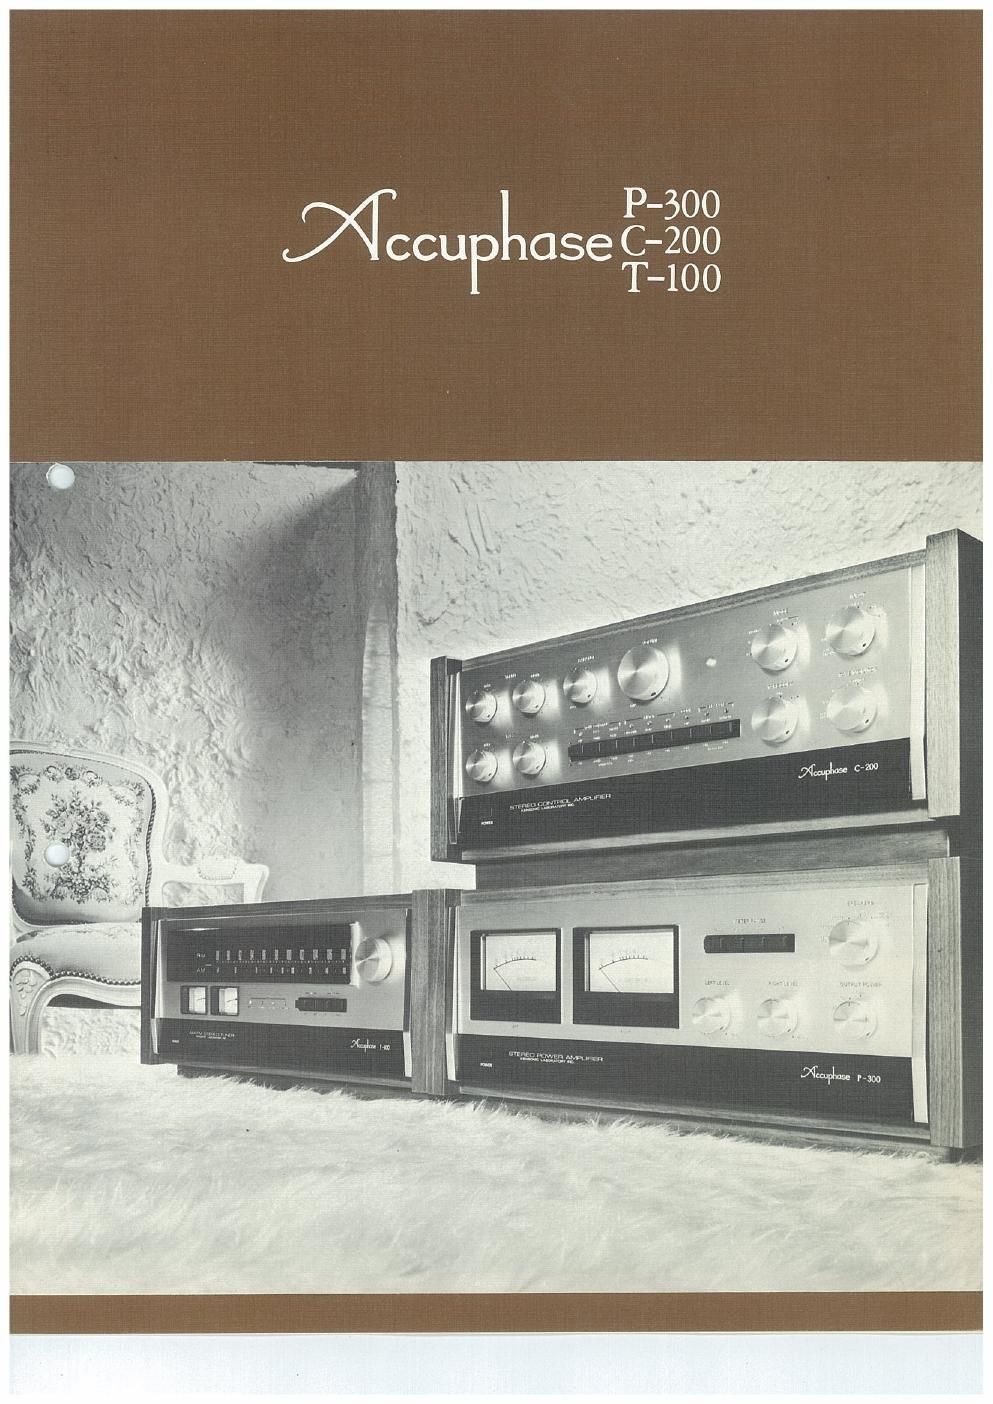 accuphase c 300 brochure